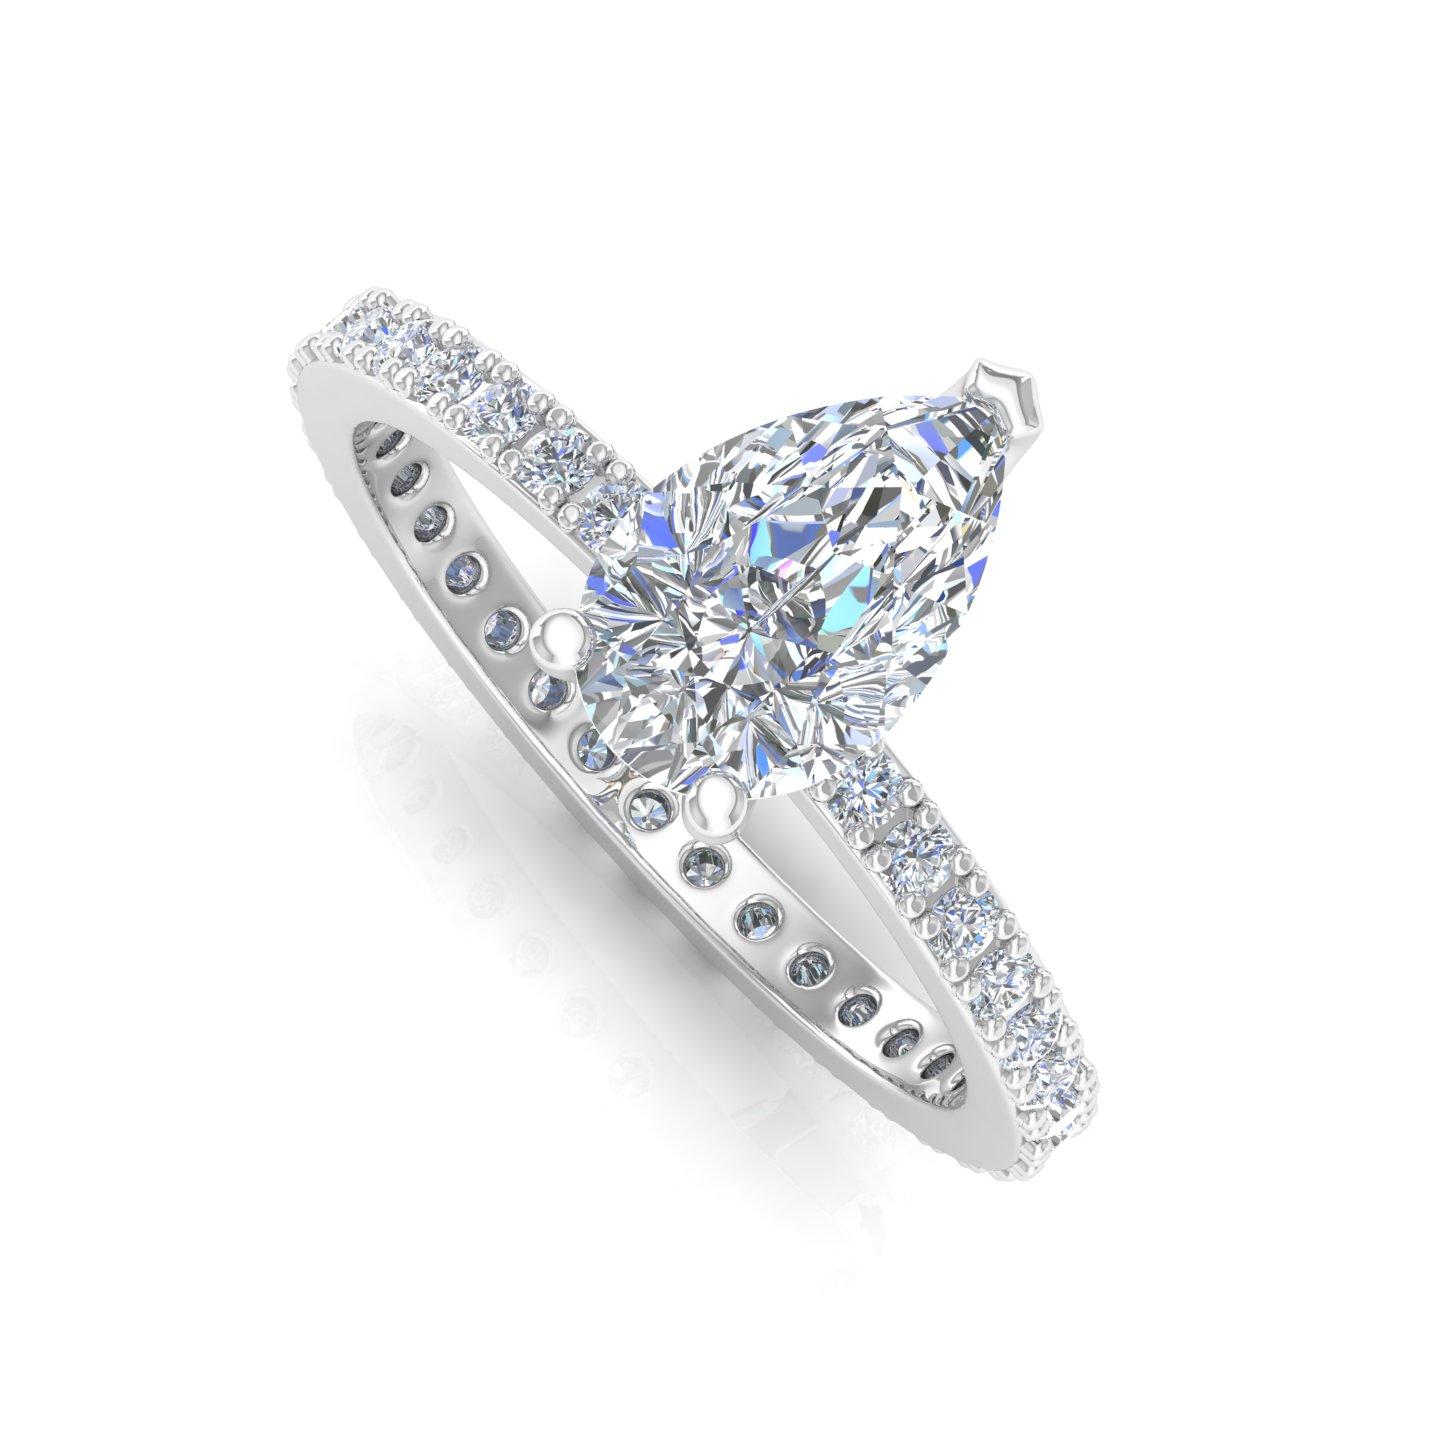 Celebrate your everlasting love with the timeless elegance of this Solitaire Pear Diamond Wedding Ring, meticulously handcrafted in exquisite 18 Karat White Gold. This stunning ring is a testament to the enduring beauty of true love and the artistry